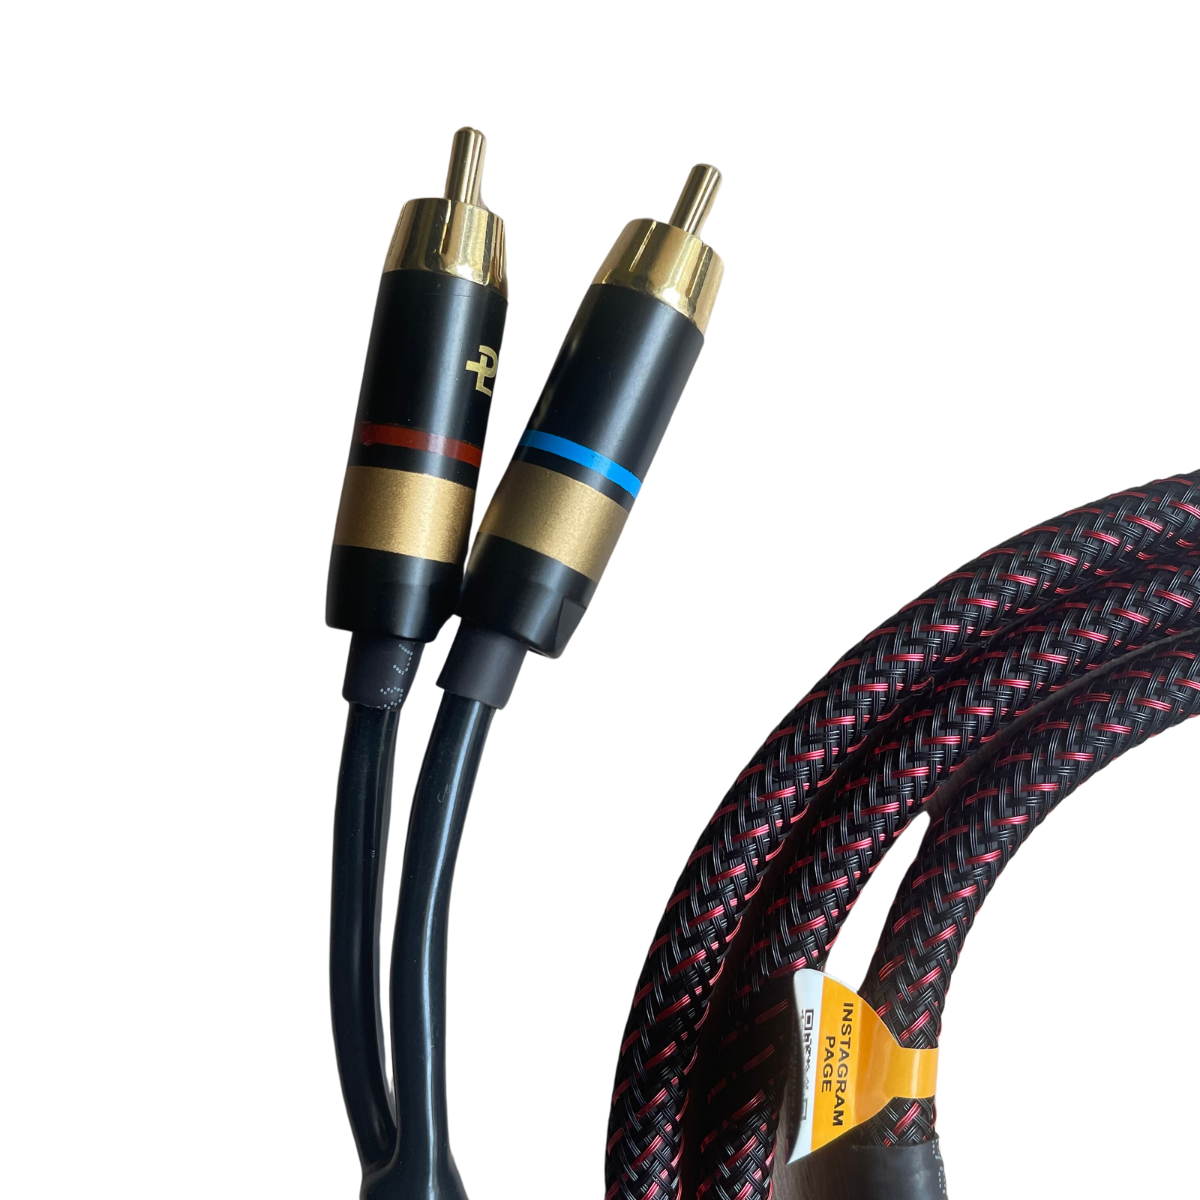 EarAudio Premium Dual RCA To 3.5mm Male Interconnects Cable